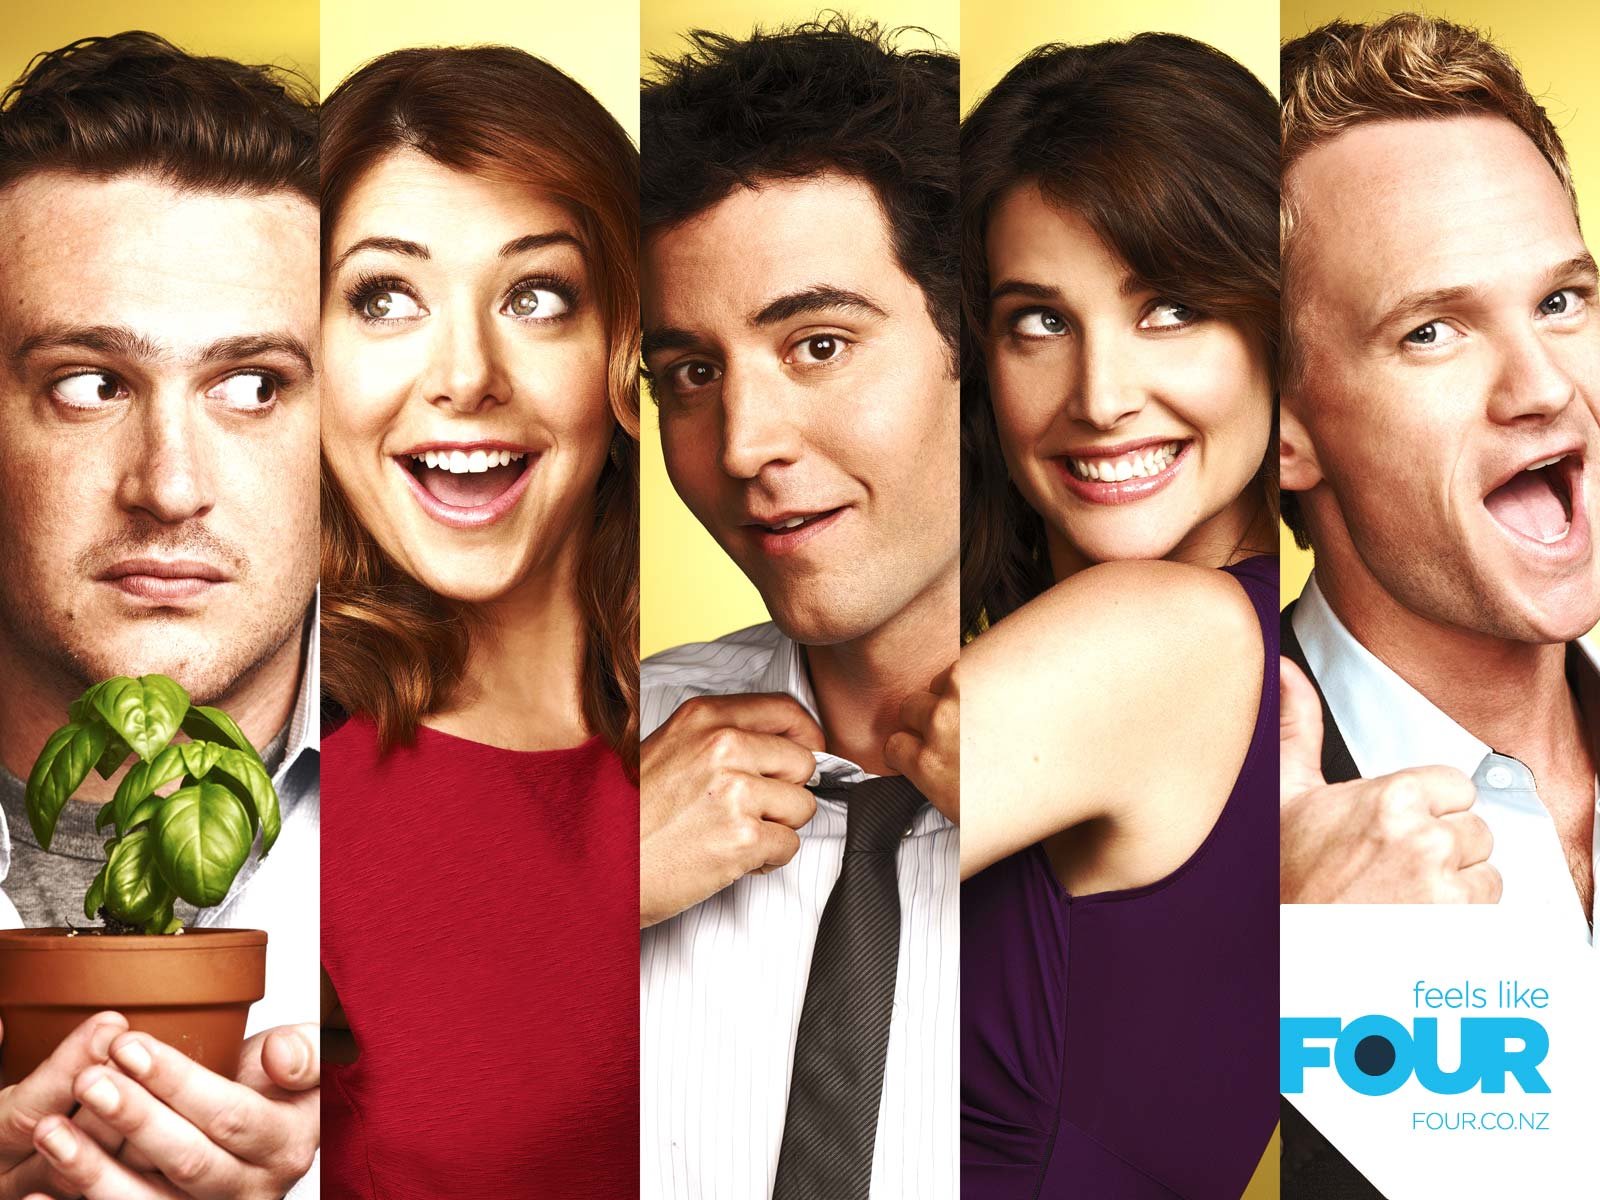 how i met your mother, Comedy, Sitcom, Series, Television, How, Met, Mother,  27 Wallpaper